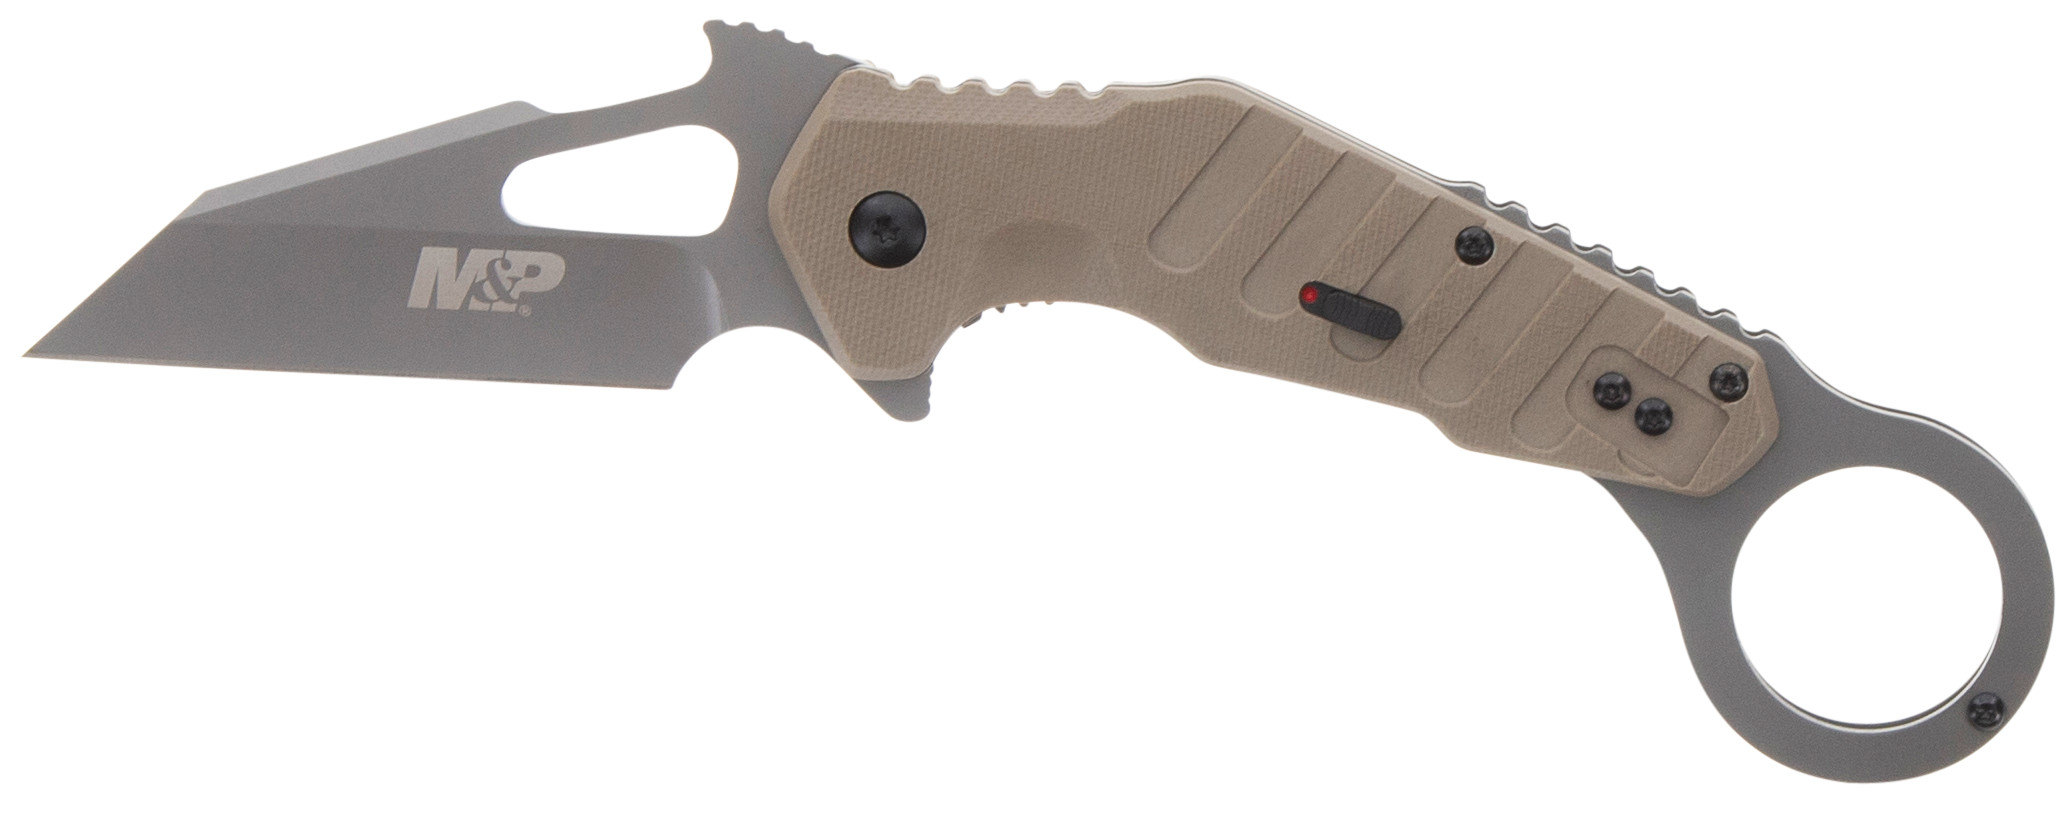 American Outdoor Brands - Extreme Ops Karambit Folder CP=3 -  1136215